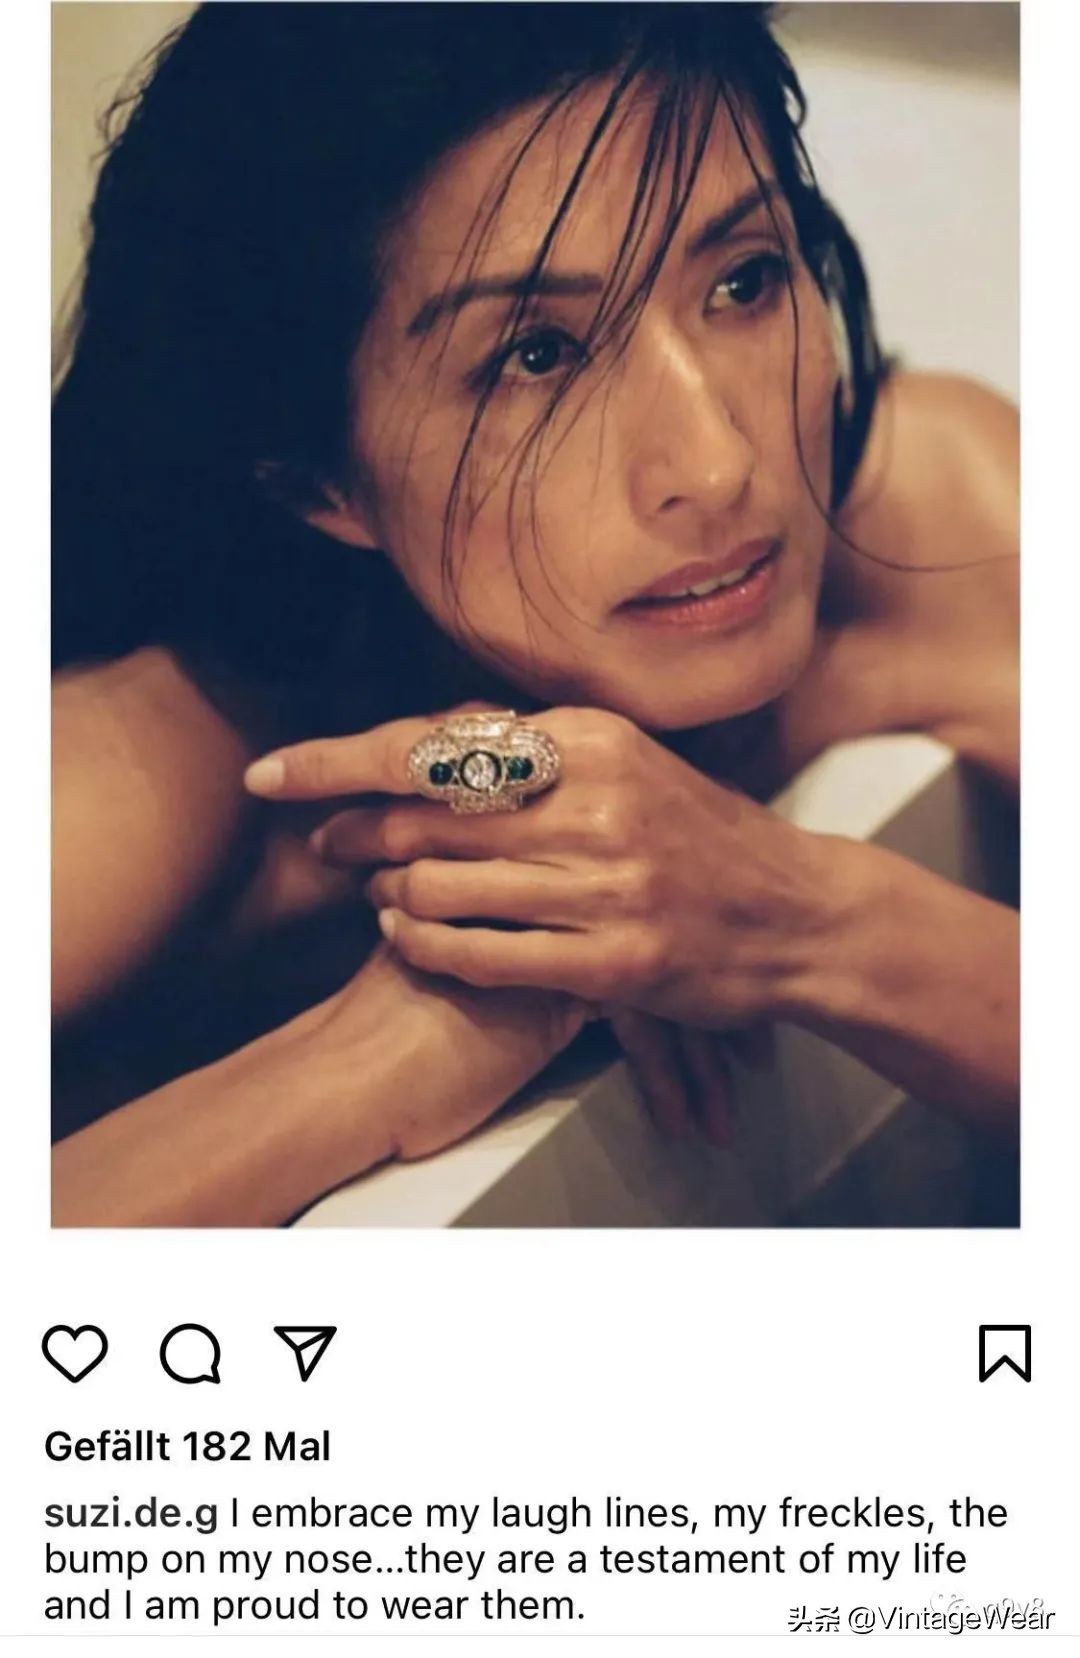 The 50-year-old Asian supermodel who debuted, was rushed to use by  Off-White and Balenciaga - iMedia